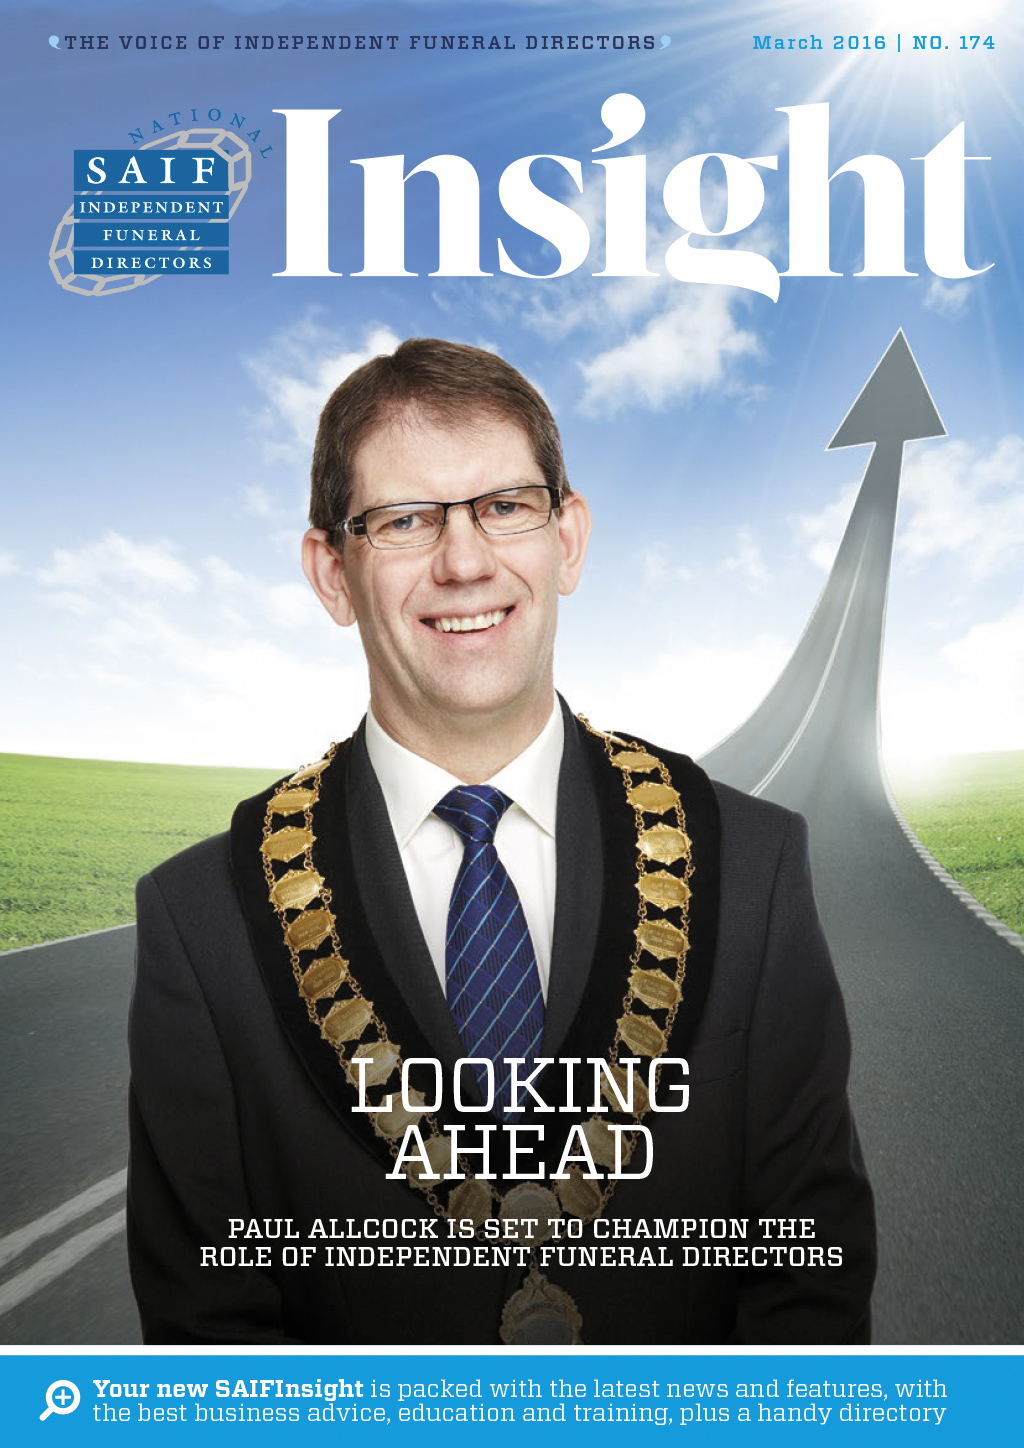 SAIF Insight March 2016: Paul Allcock is set to champion the role of independent funeral directors